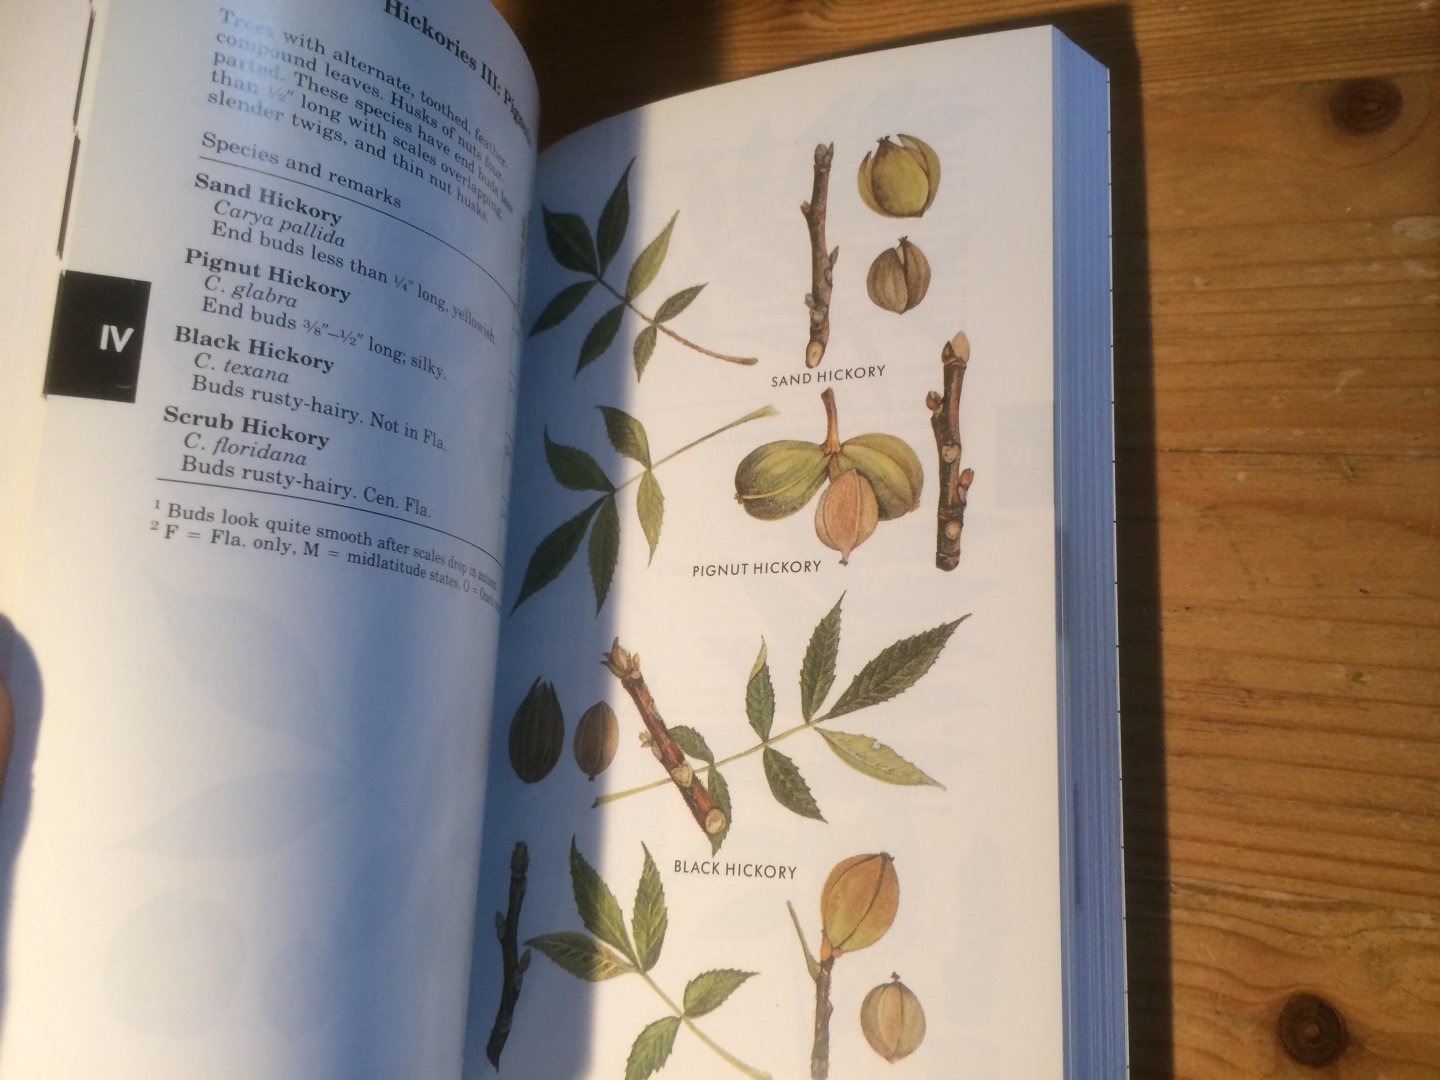 Petrides, George A - Eastern Trees - Peterson Field Guides no 11